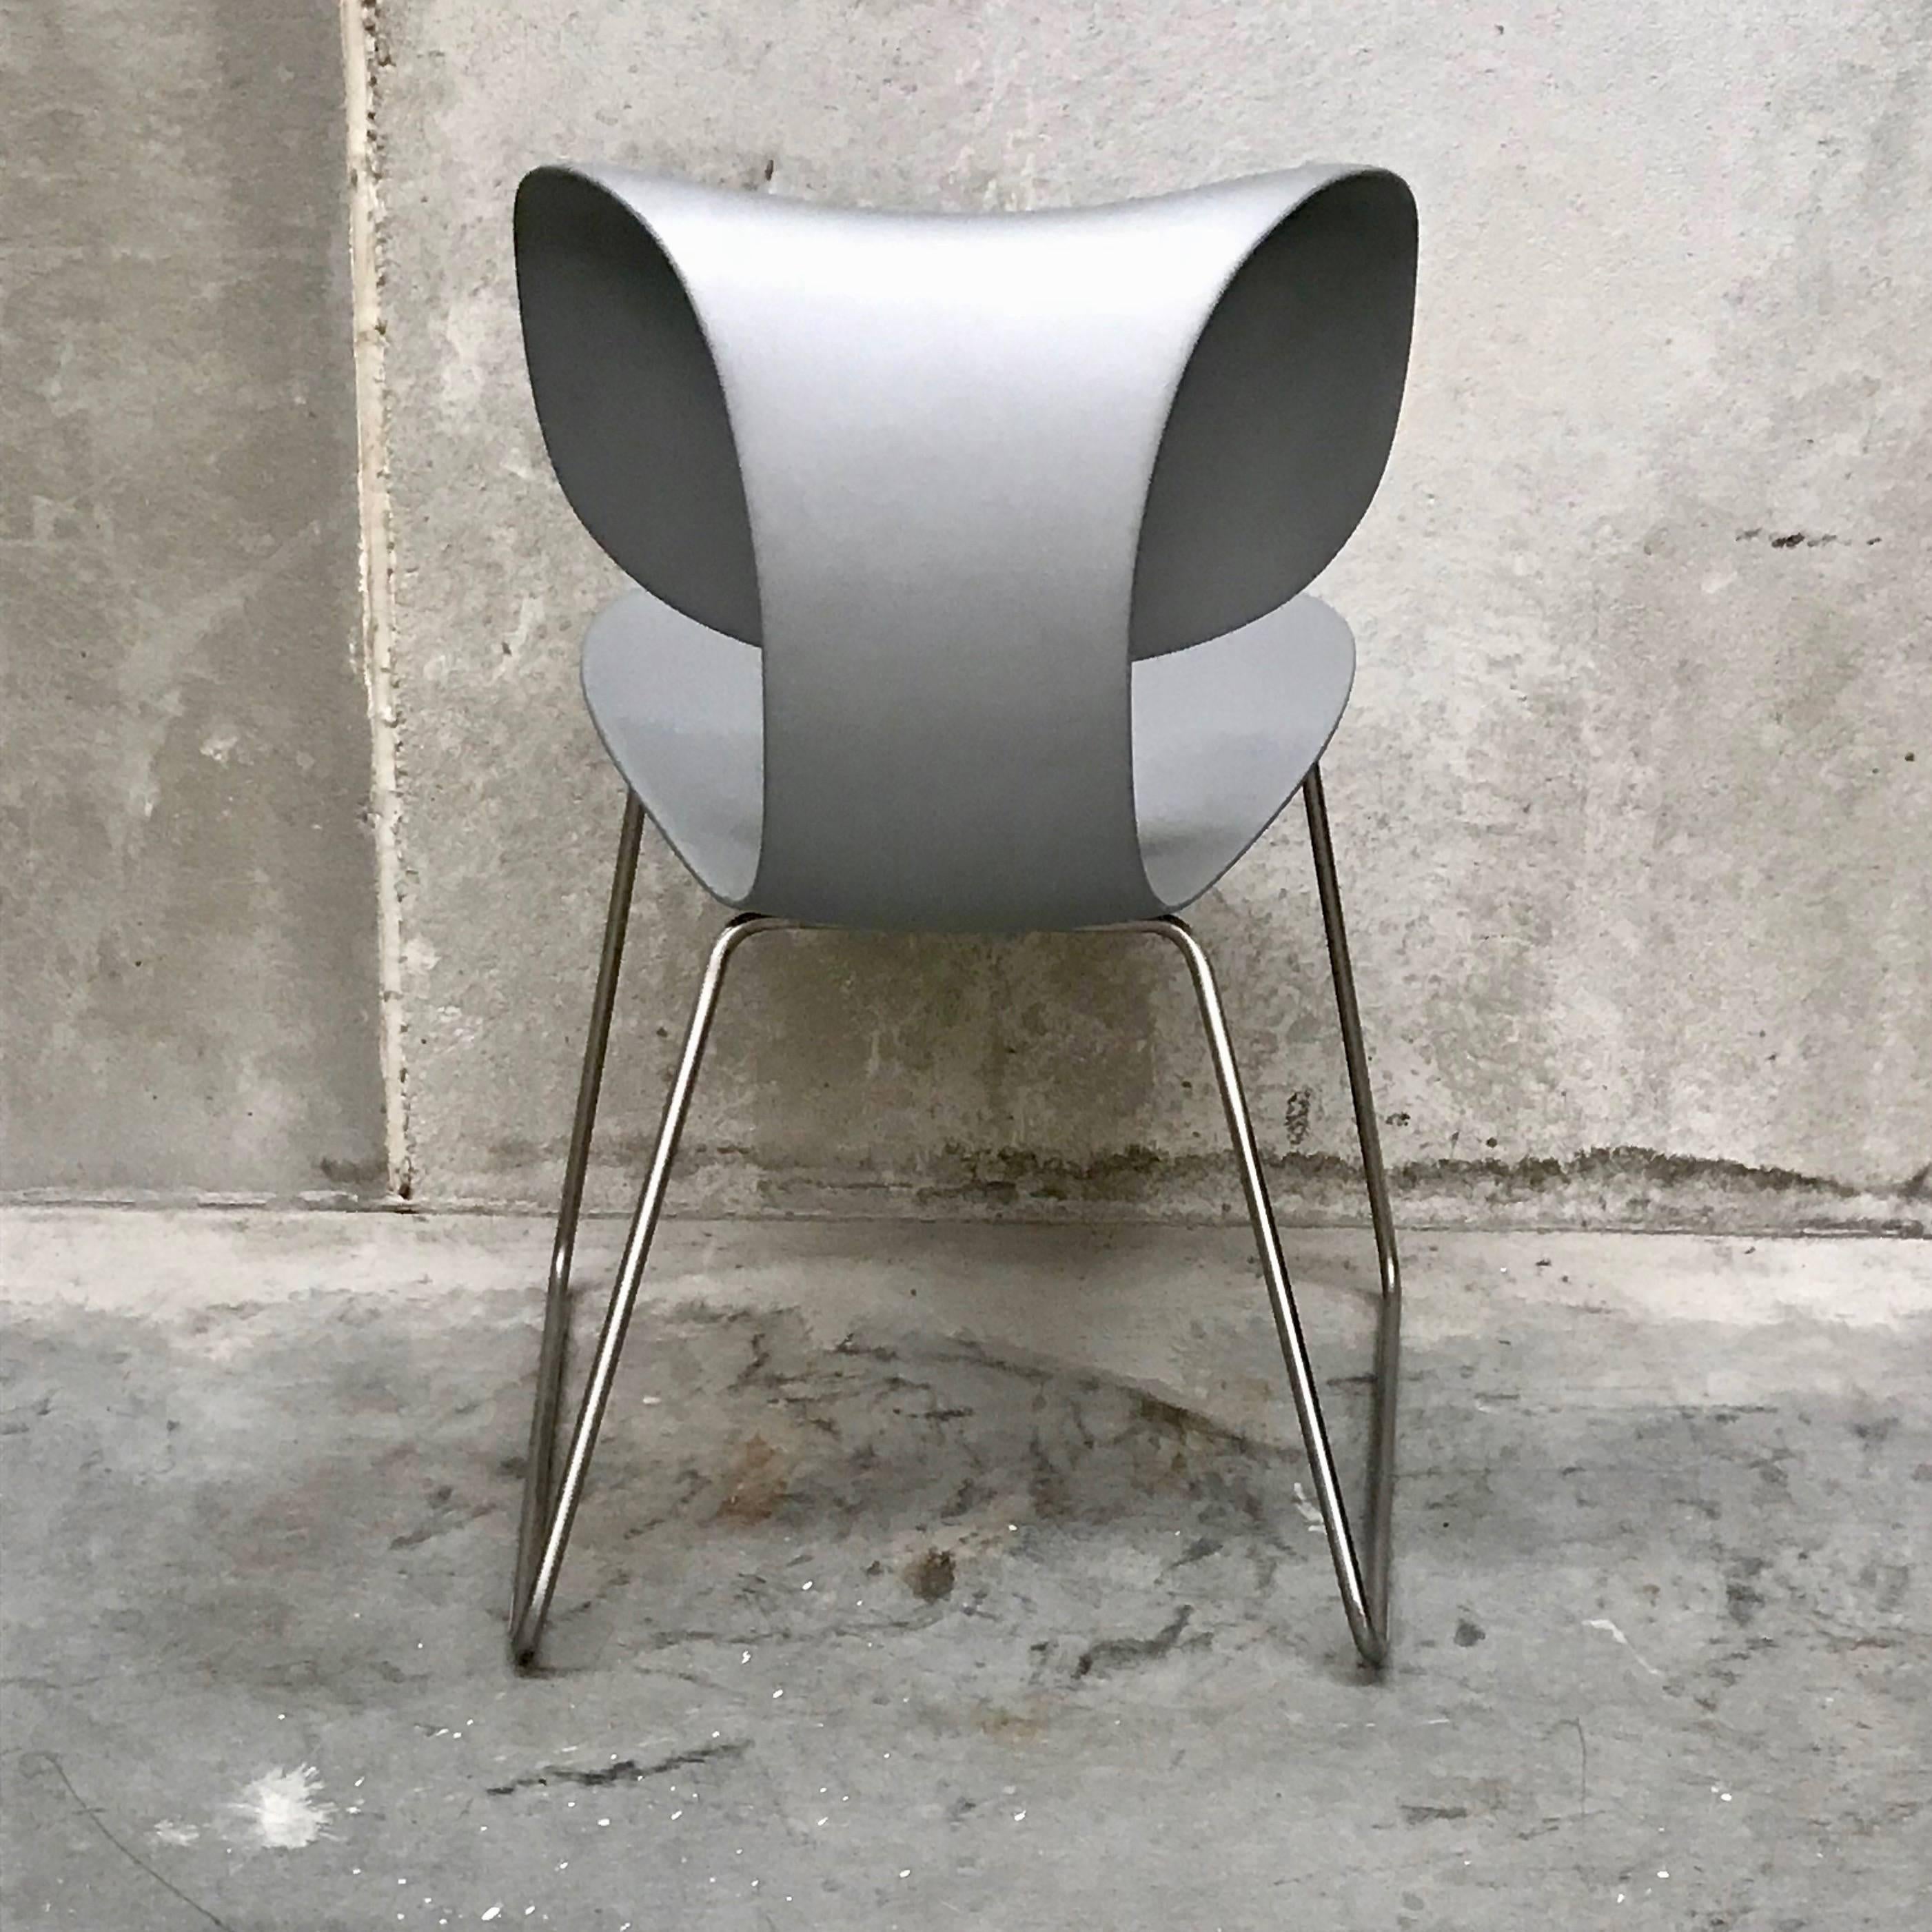 The Maxima chair by William Sawaya for Sawaya & Moroni are designed by William Sawaya 2002. The chairs are a flexible moulded plastic seat with a stainless steel sled base.